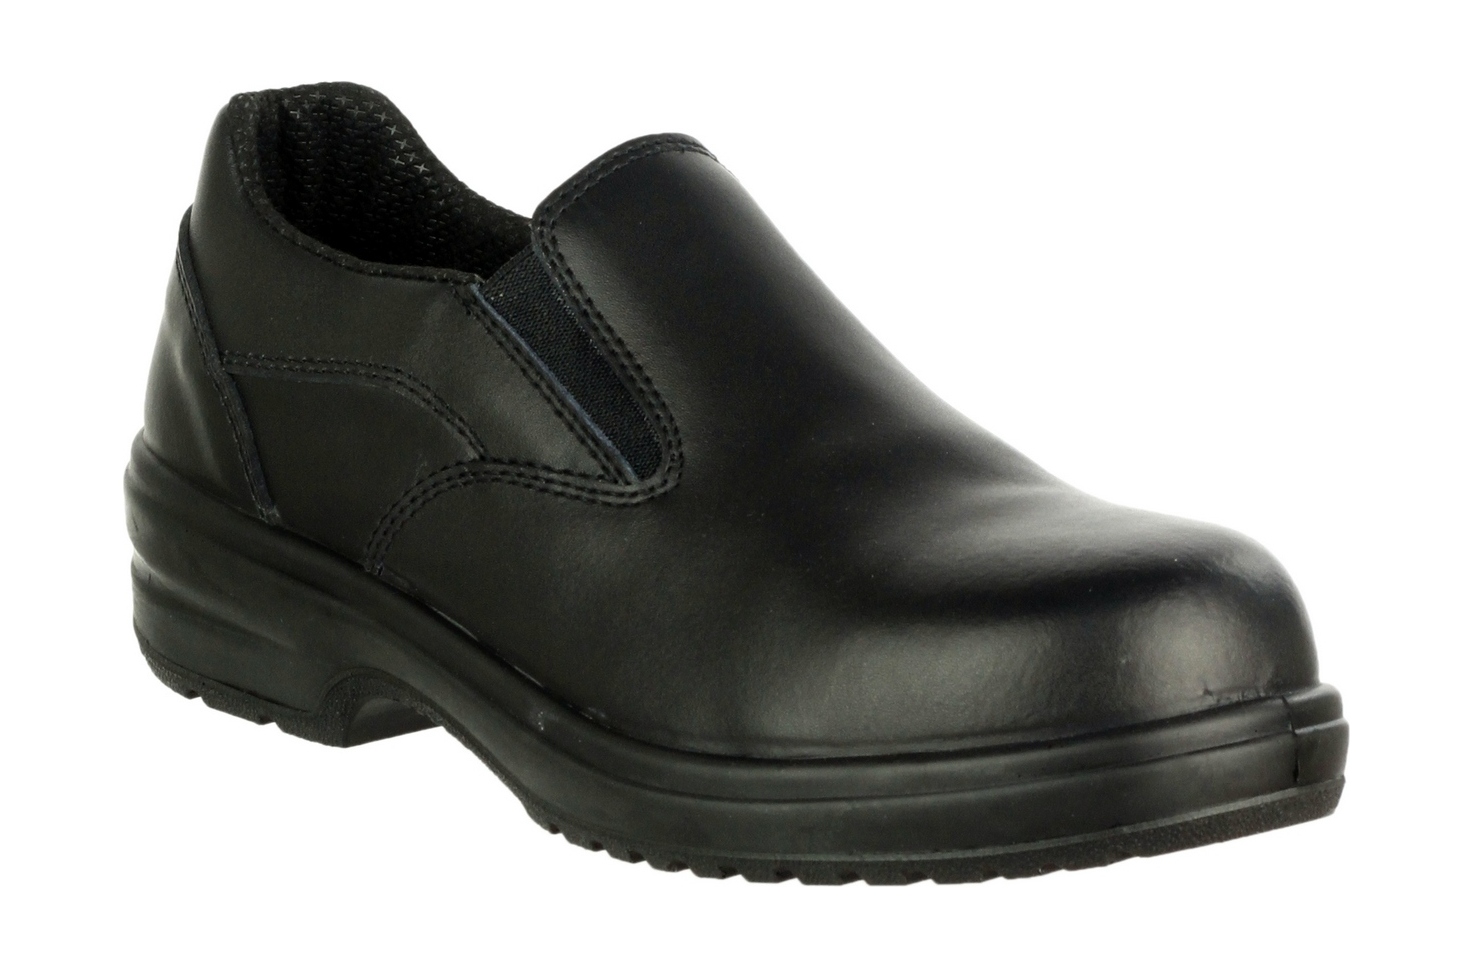 Amblers Safety Ladies FS94C Leather Safety Shoes Black